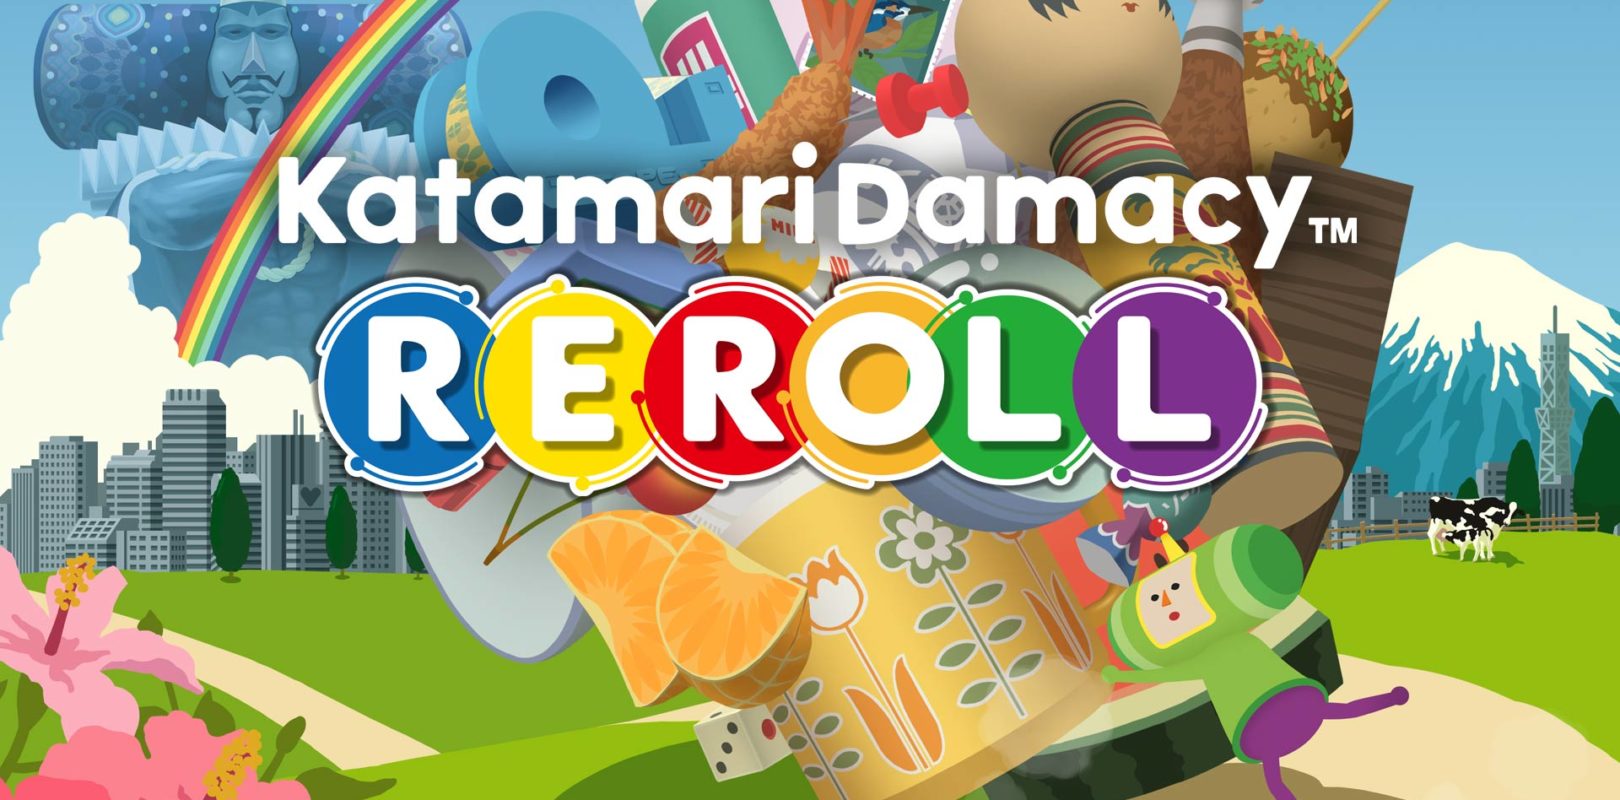 Katamari Damacy REROLL Review (PS4) - Today Is A Good Day For Rolling